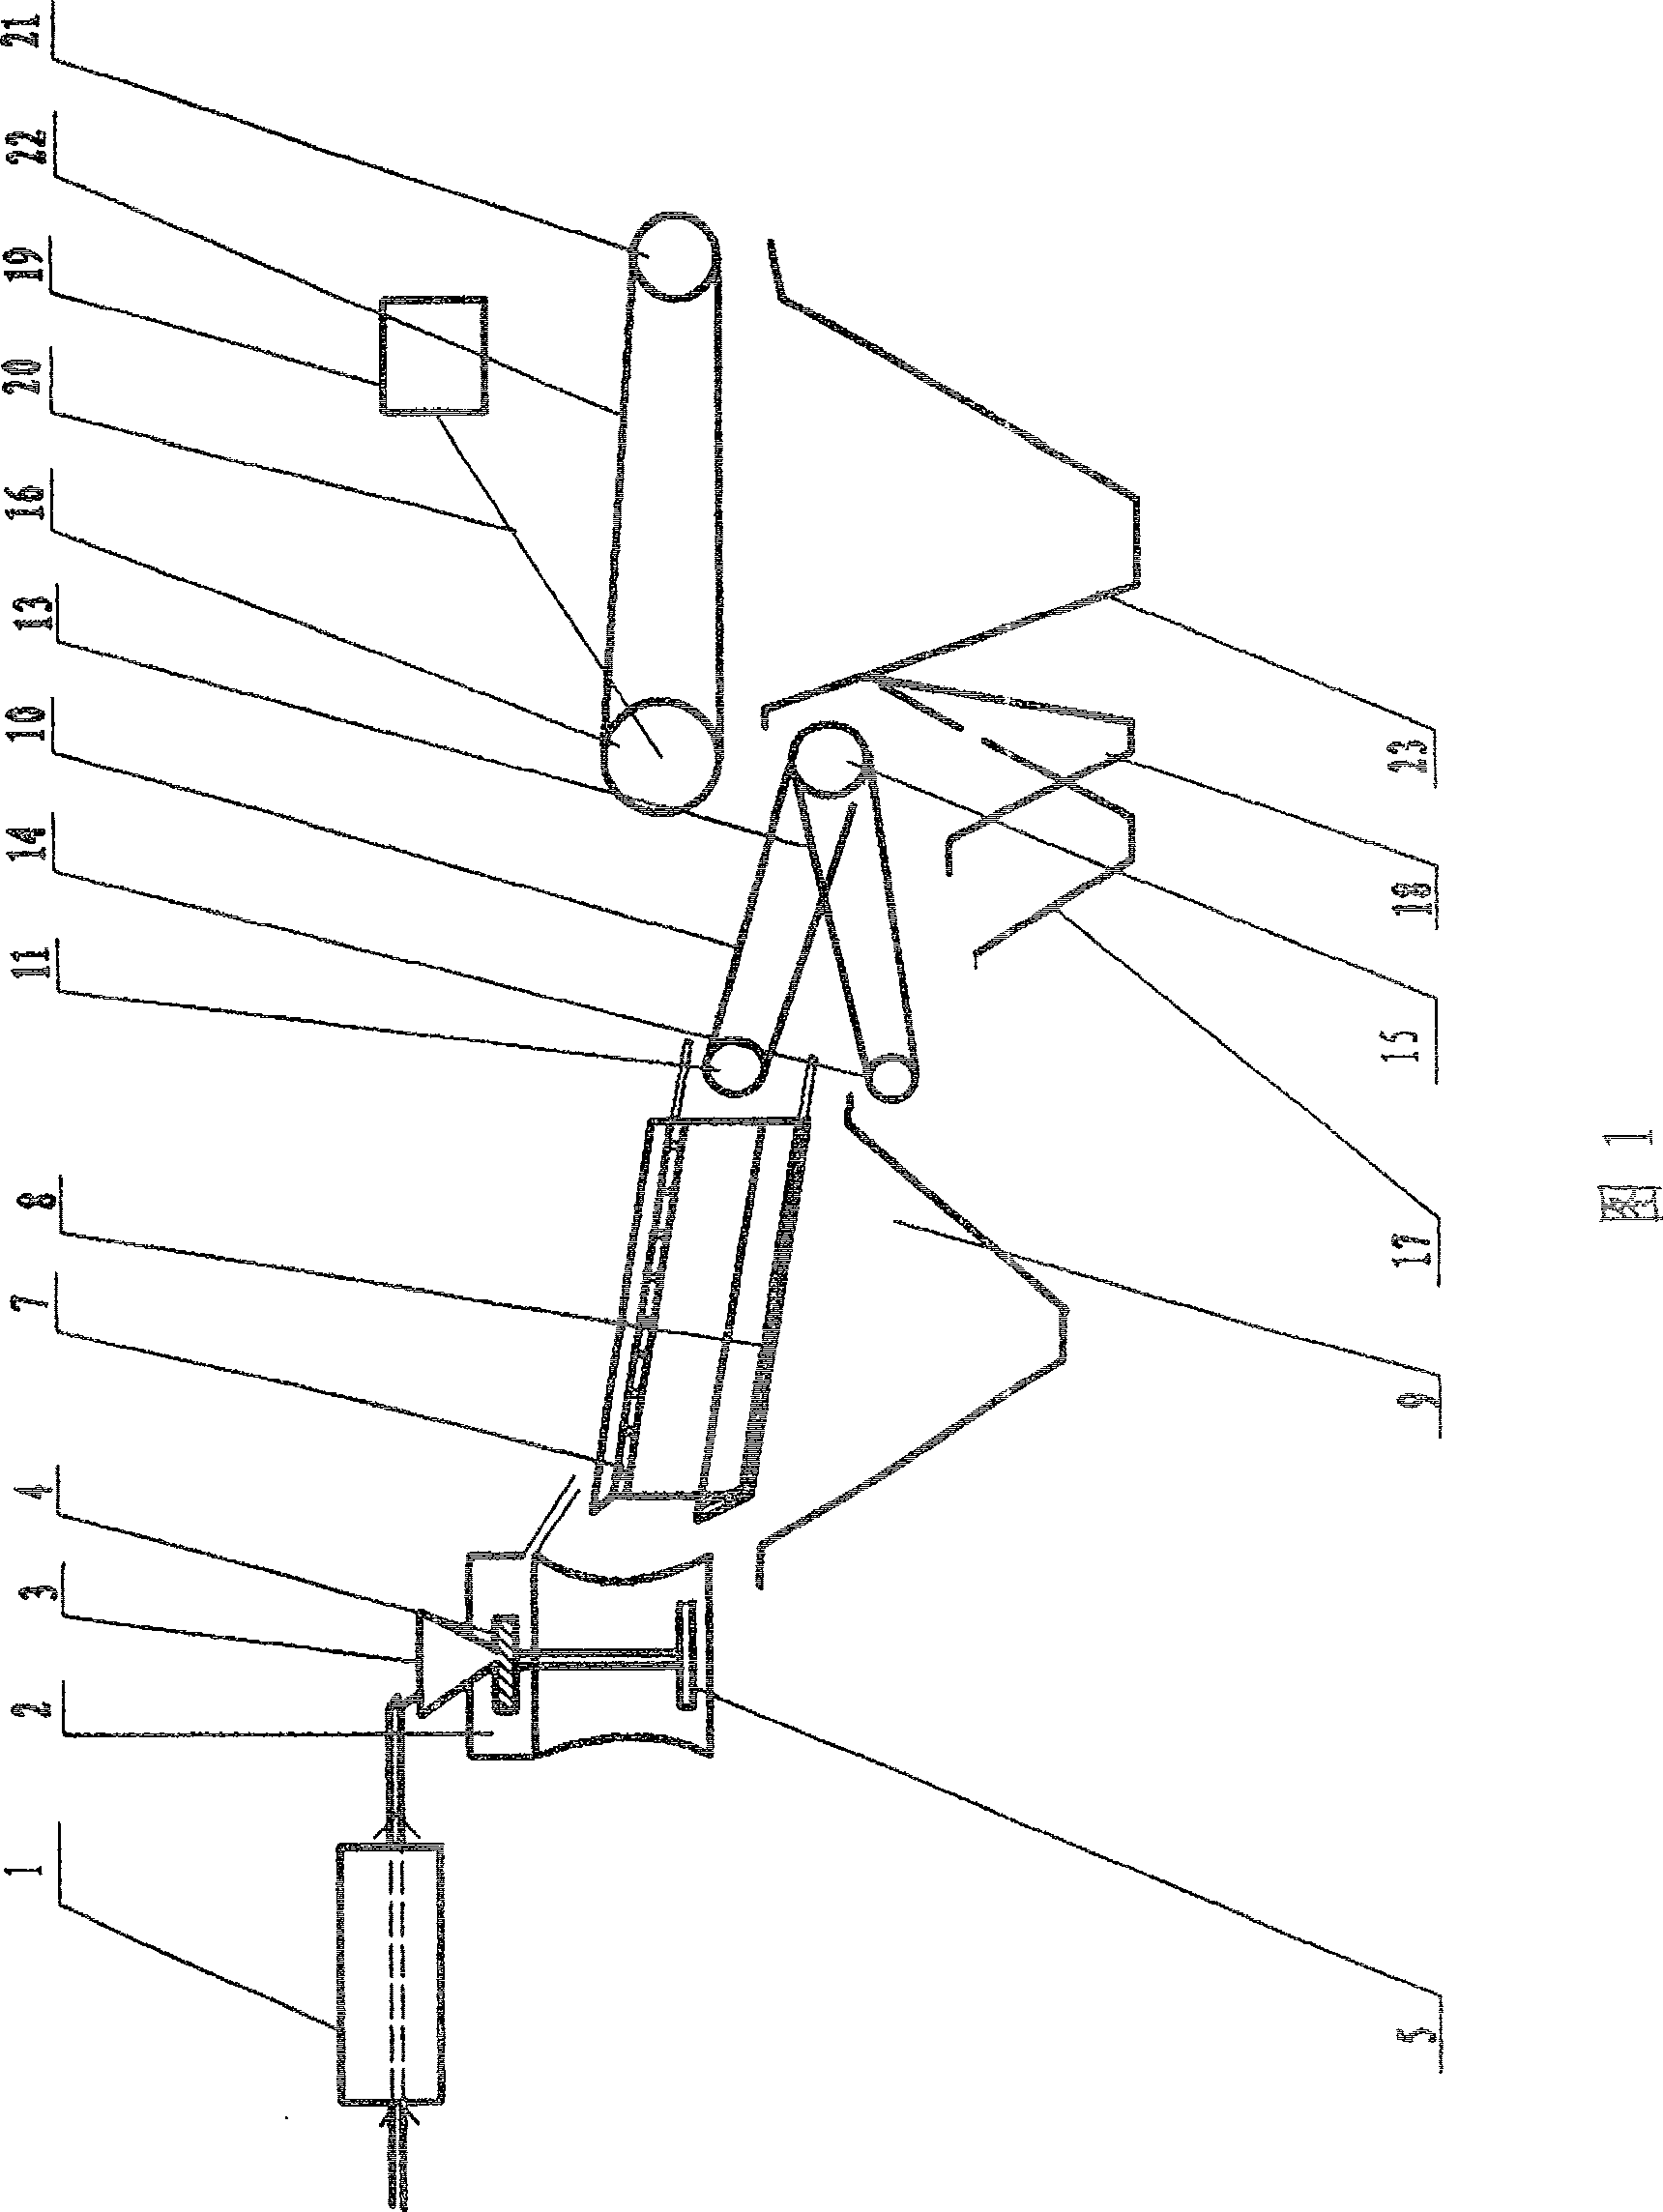 Method and device for dehulling separation of flax seed